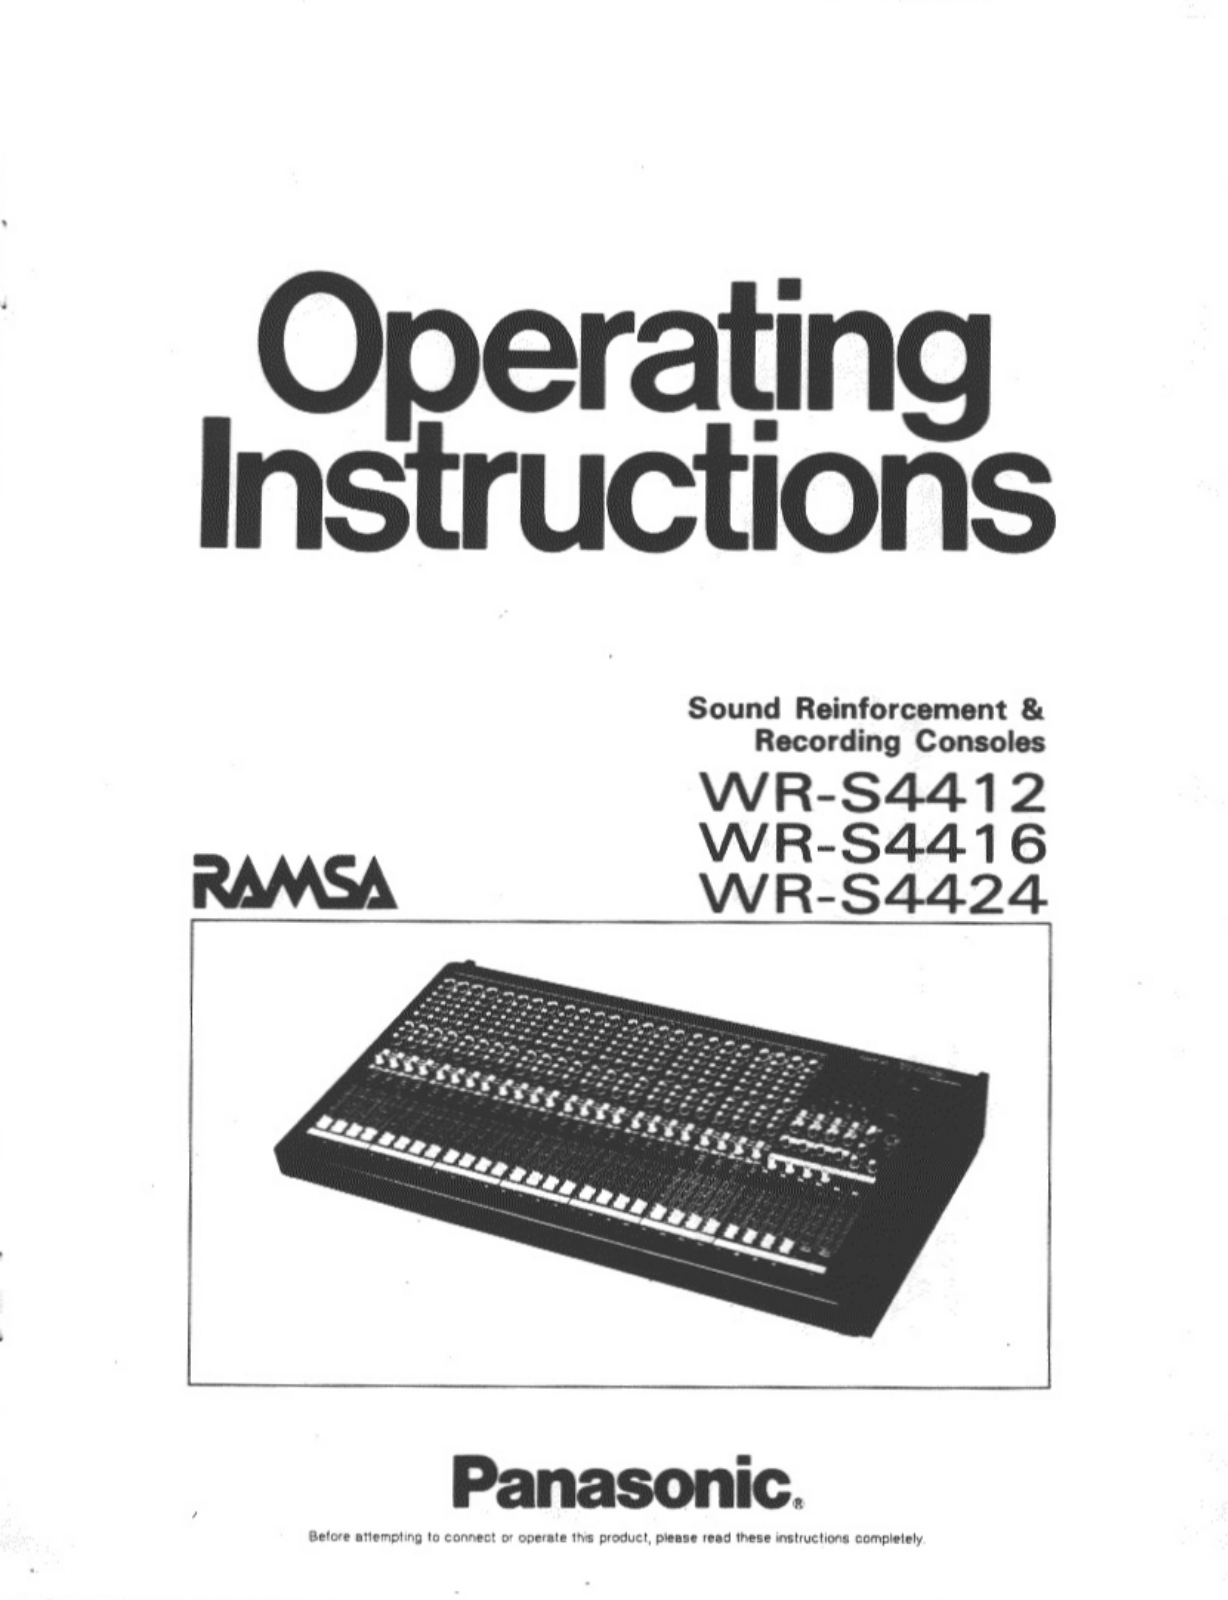 Panasonic WR-S4412, WR-S4416, WR-S4424 Operation Manual